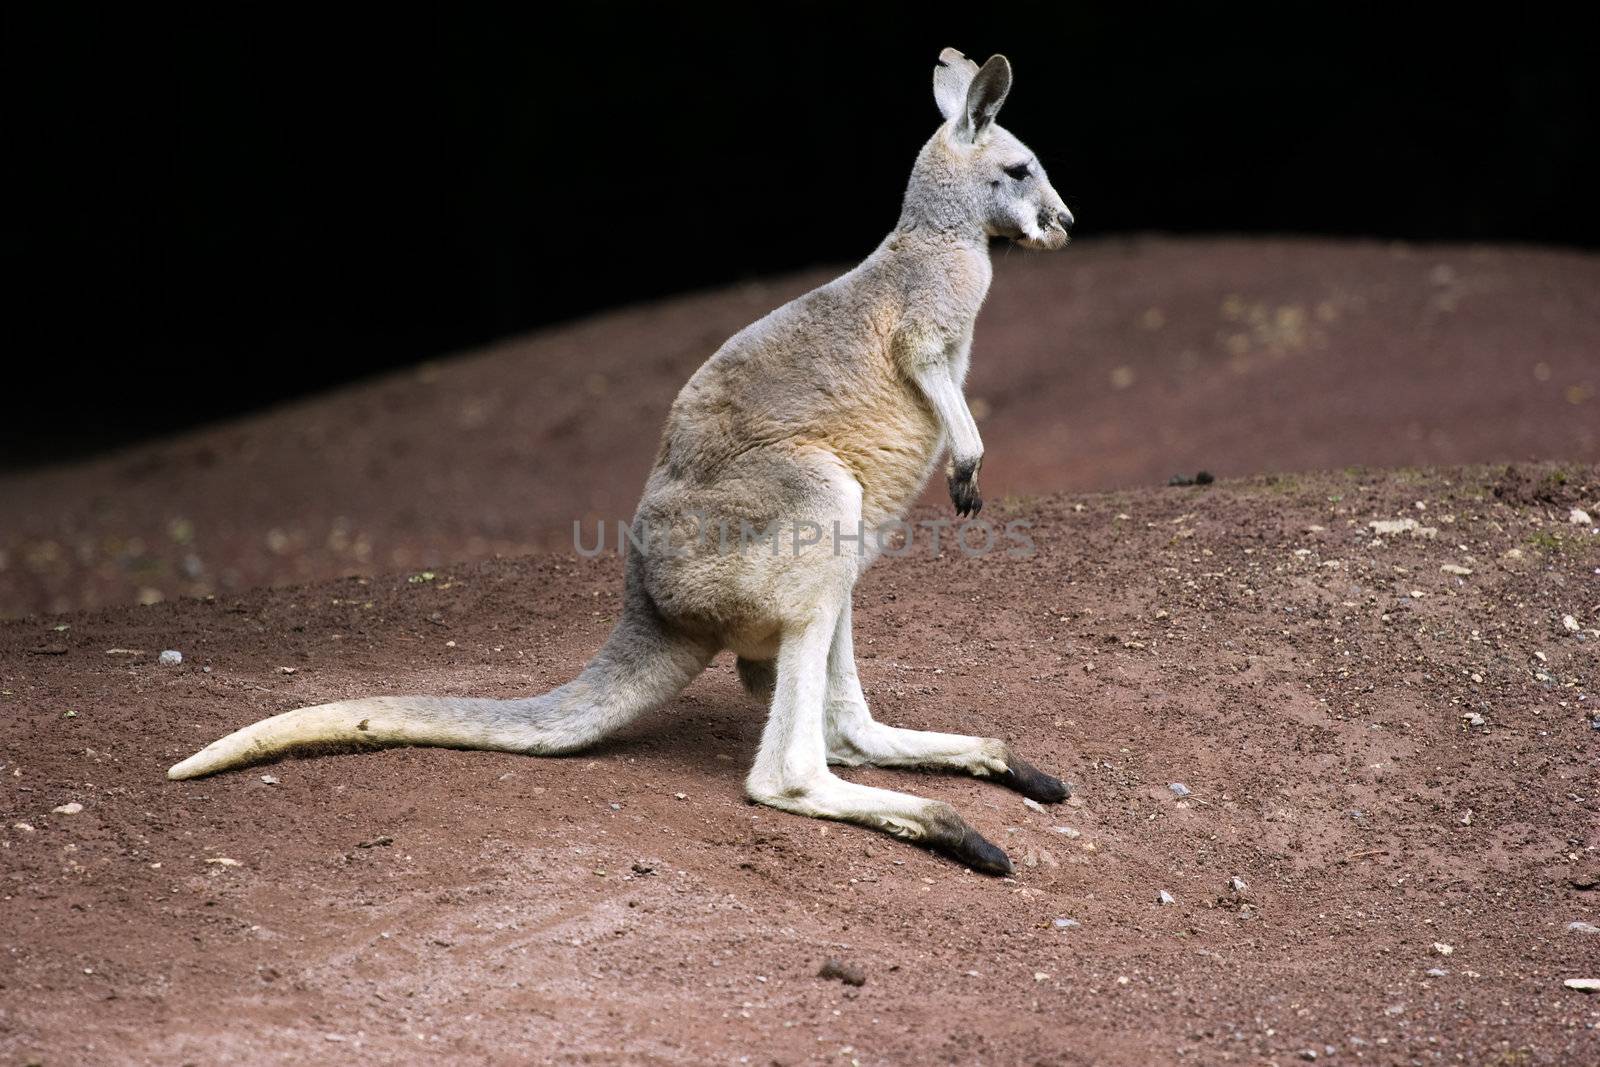 Kangaroo is a marsupial from the family Macropodidae (macropods, meaning 'large foot'). The kangaroo is an Australian icon. Clipping path for animal included.